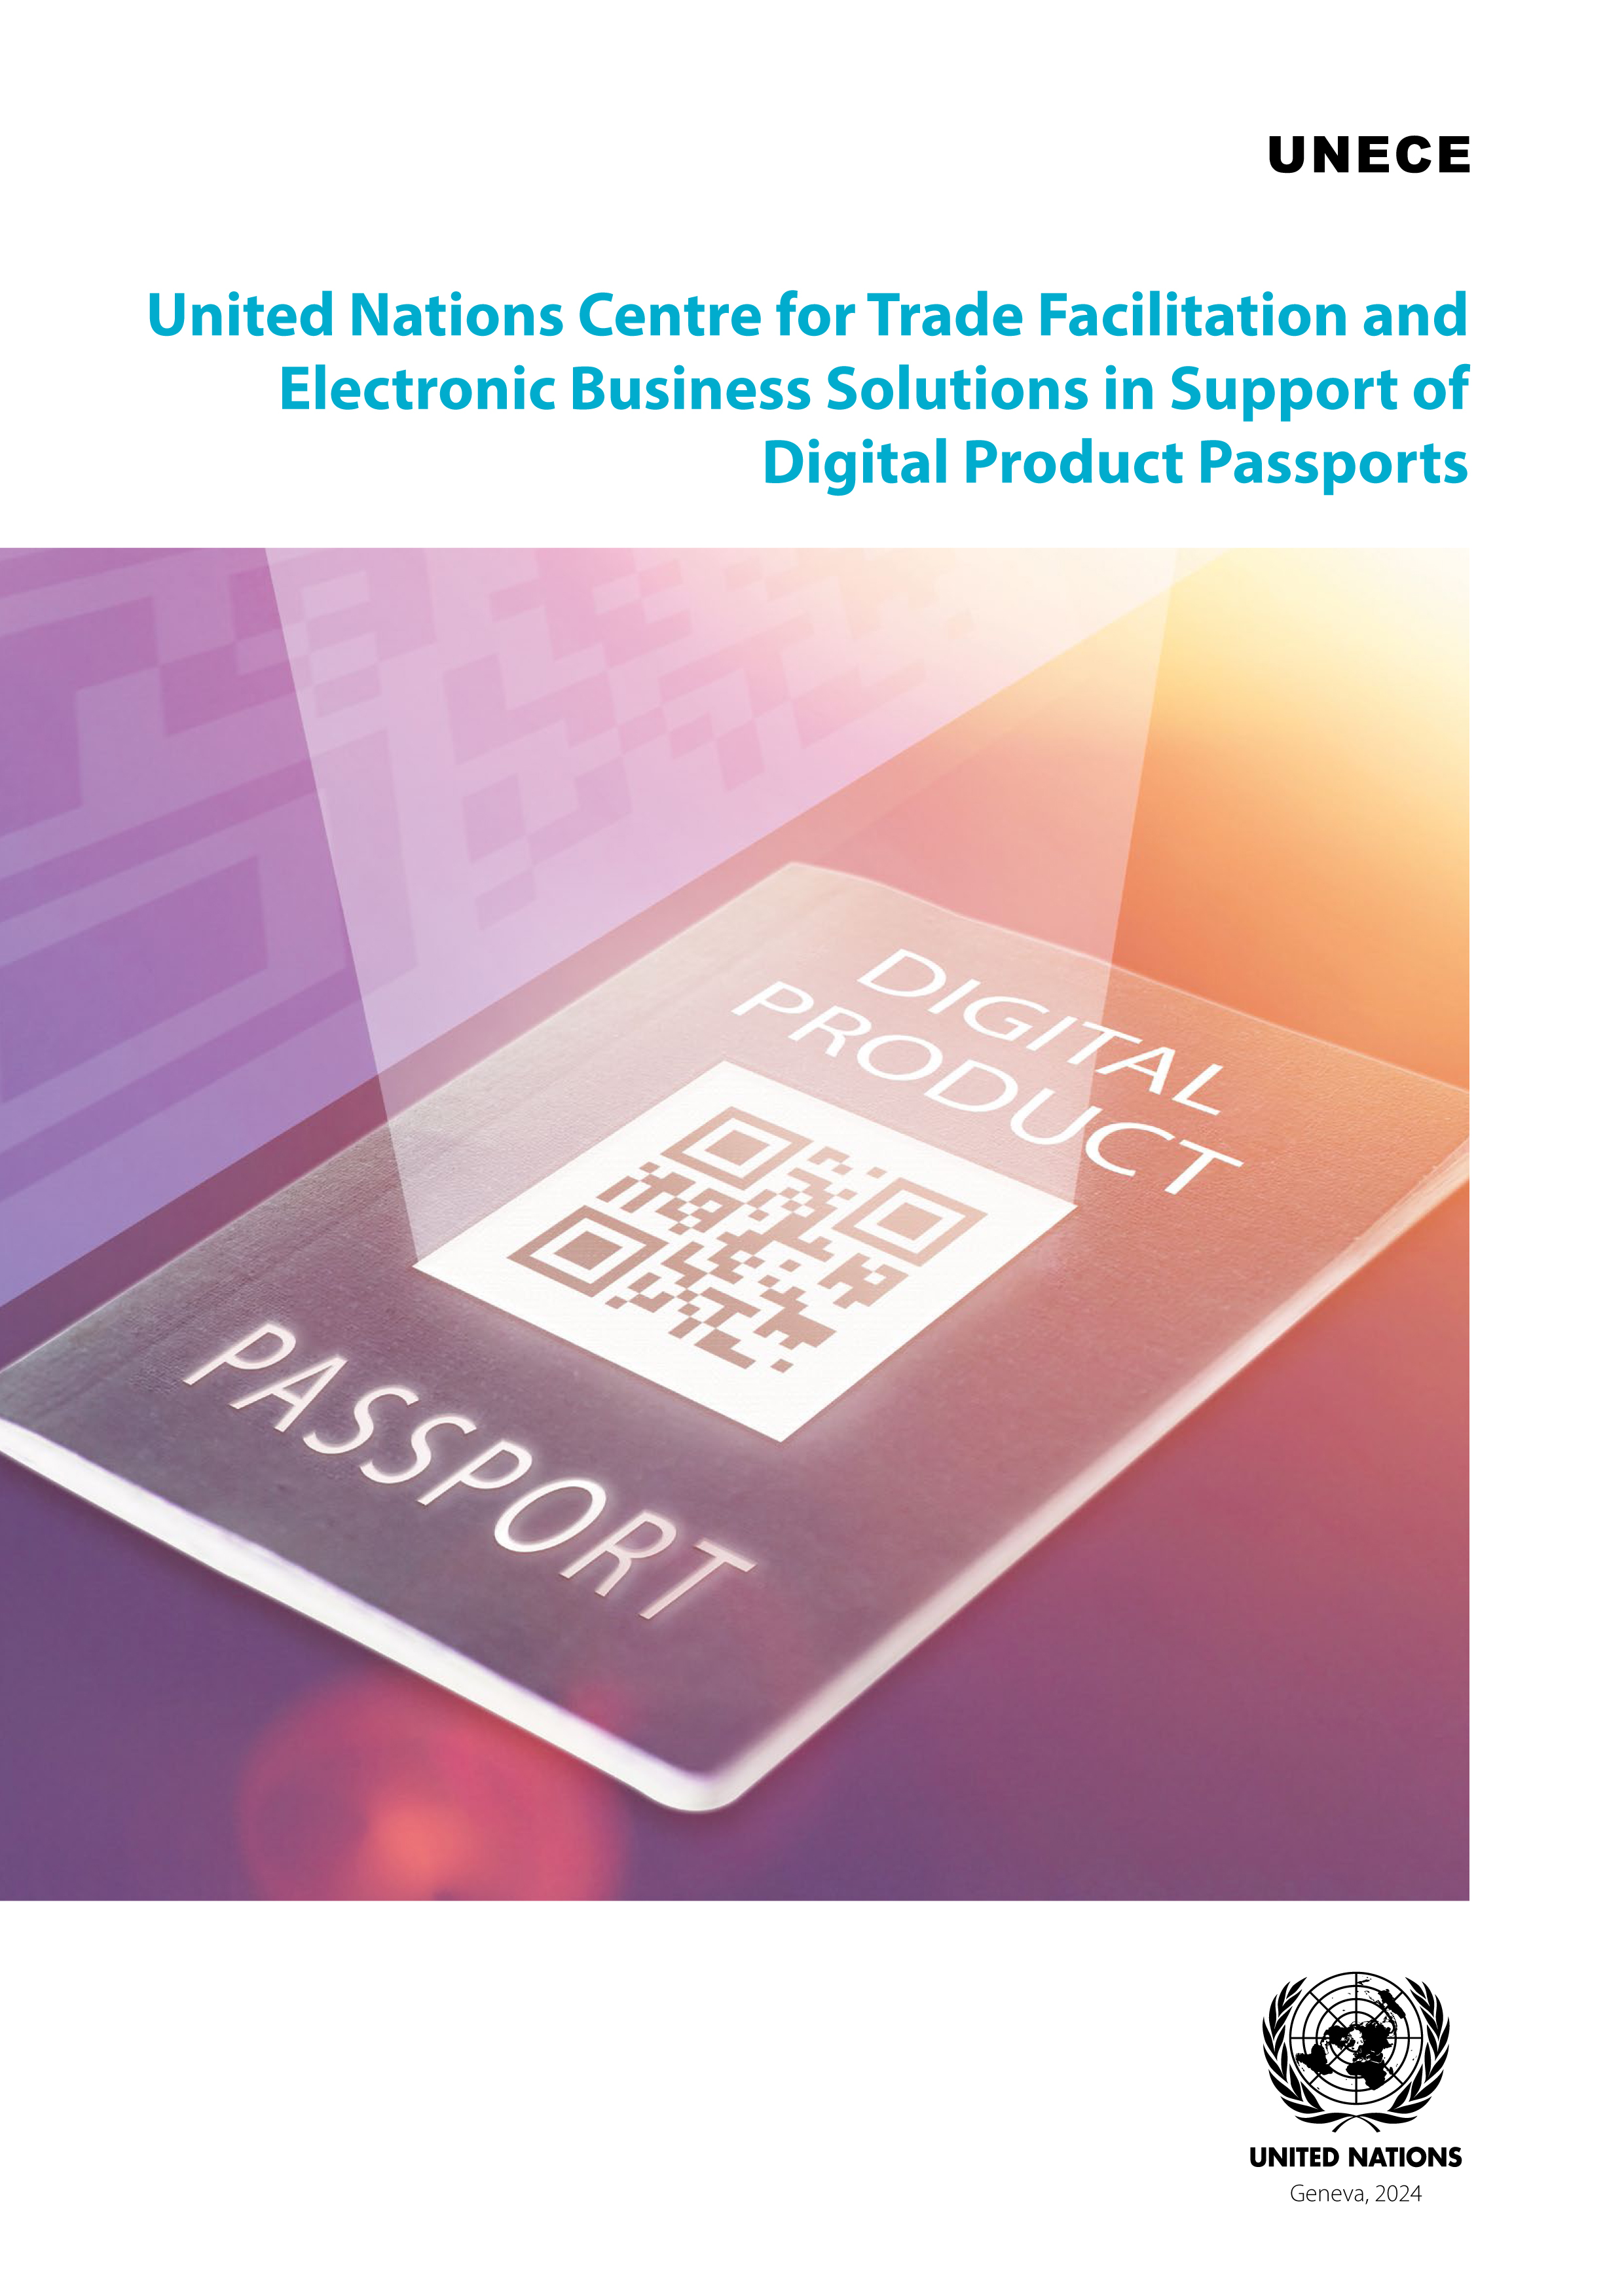 image of United Nations Centre for Trade Facilitation and Electronic Business Solutions in Support of Digital Product Passports